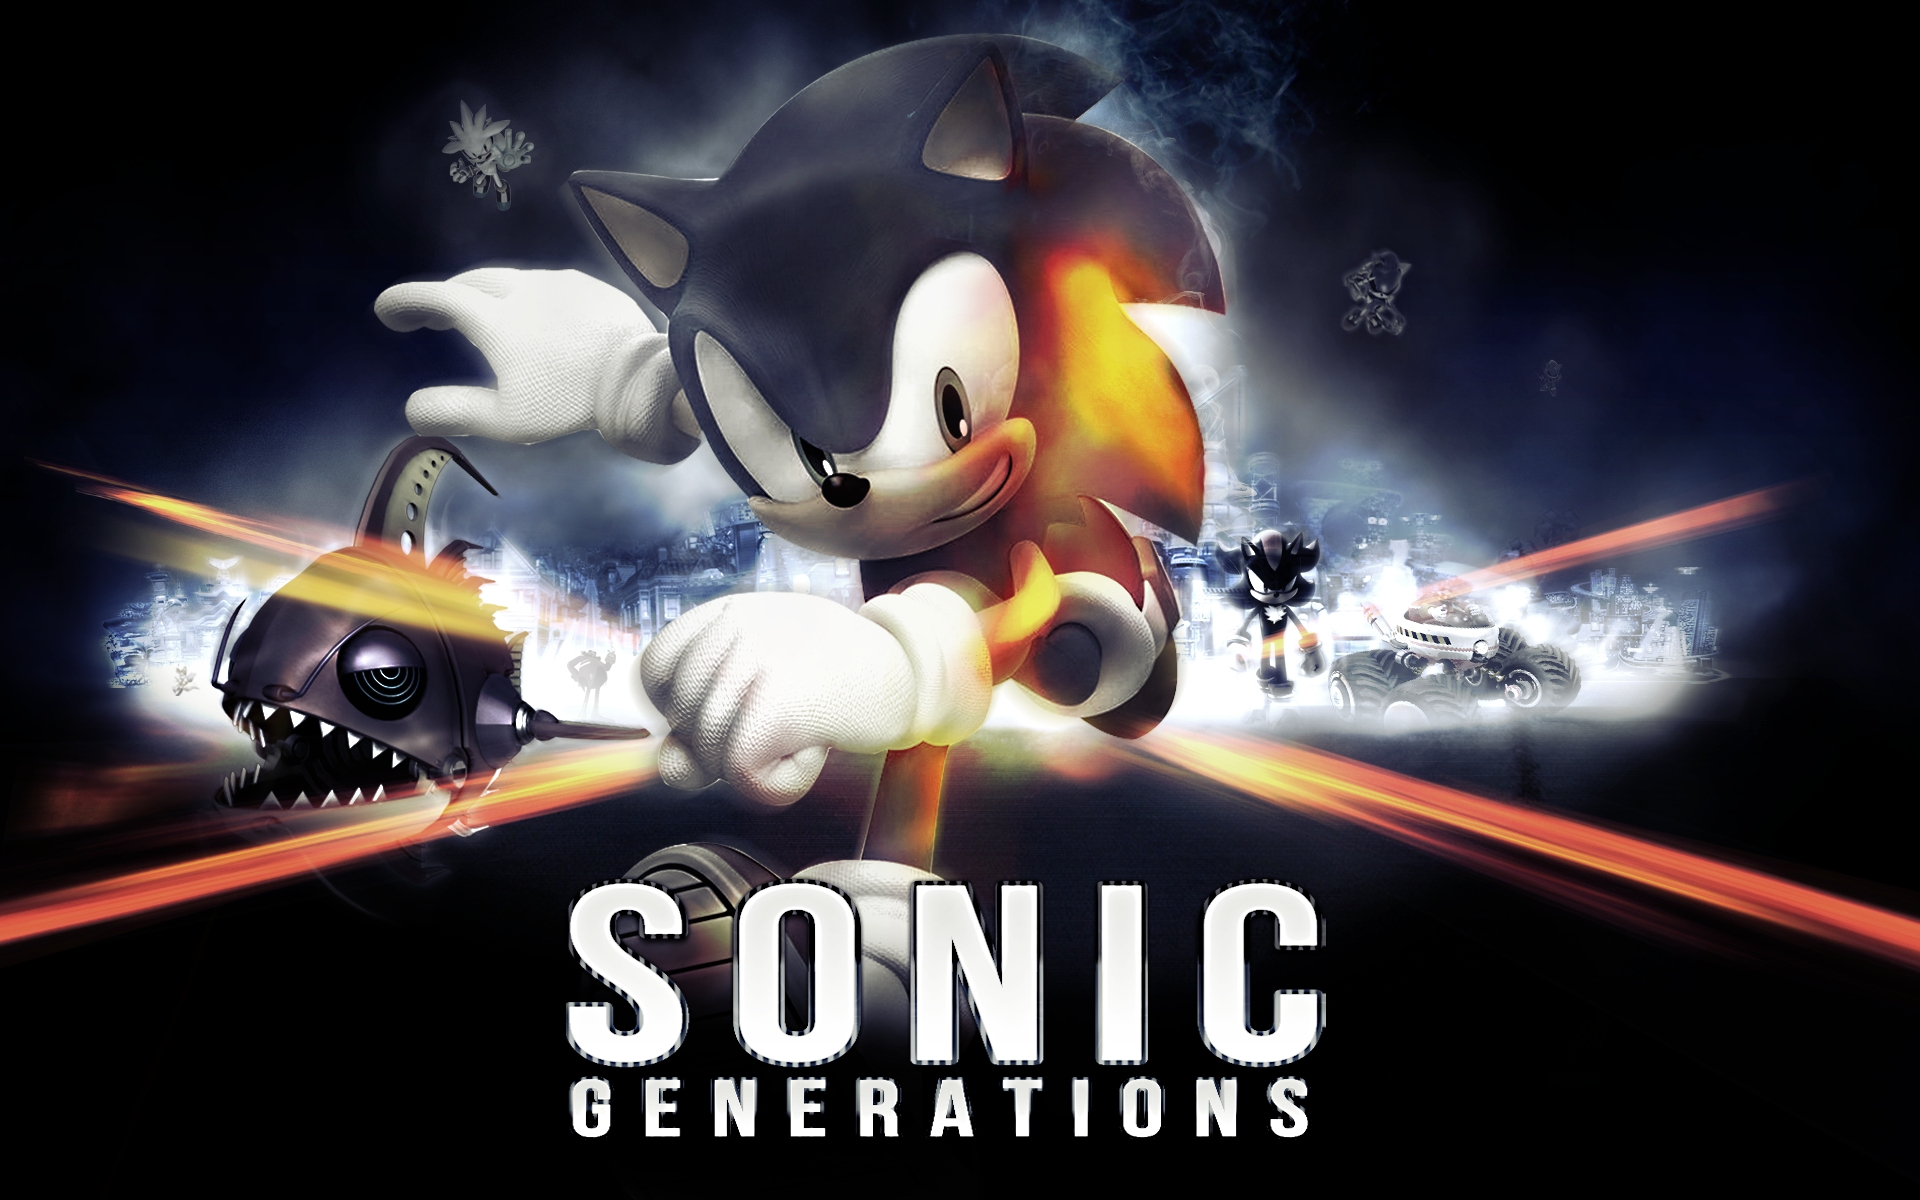 1920x1200 sonic generations battle field stay cool with Sonic and Shadow Wallpaper (32189598) Fanpop